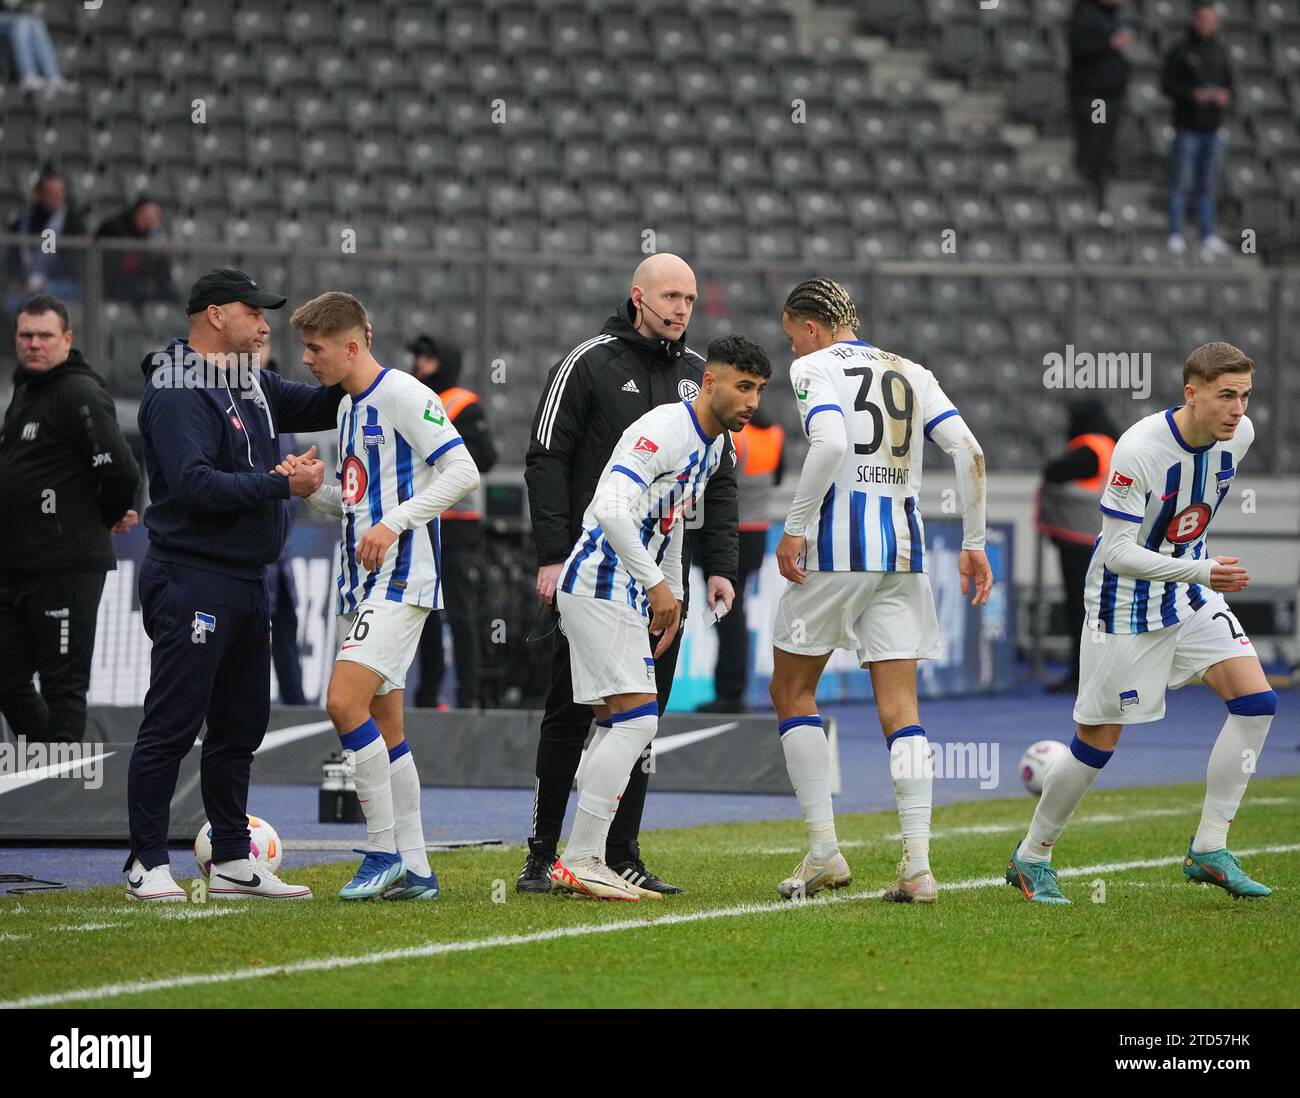 16 December 2023, Berlin: Soccer: Bundesliga 2, Hertha BSC - VfL Osnabrück, Matchday 17, Olympiastadion. Hertha coach Pal Dardai (l) substitutes Gustav Christensen (2nd from left) and Derry Scherhant (2nd from right) for Marten Winkler (r) and Nader El-Jindaoui (M). Photo: Soeren Stache/dpa - IMPORTANT NOTE: In accordance with the regulations of the DFL German Football League and the DFB German Football Association, it is prohibited to utilize or have utilized photographs taken in the stadium and/or of the match in the form of sequential images and/or video-like photo series. Stock Photo